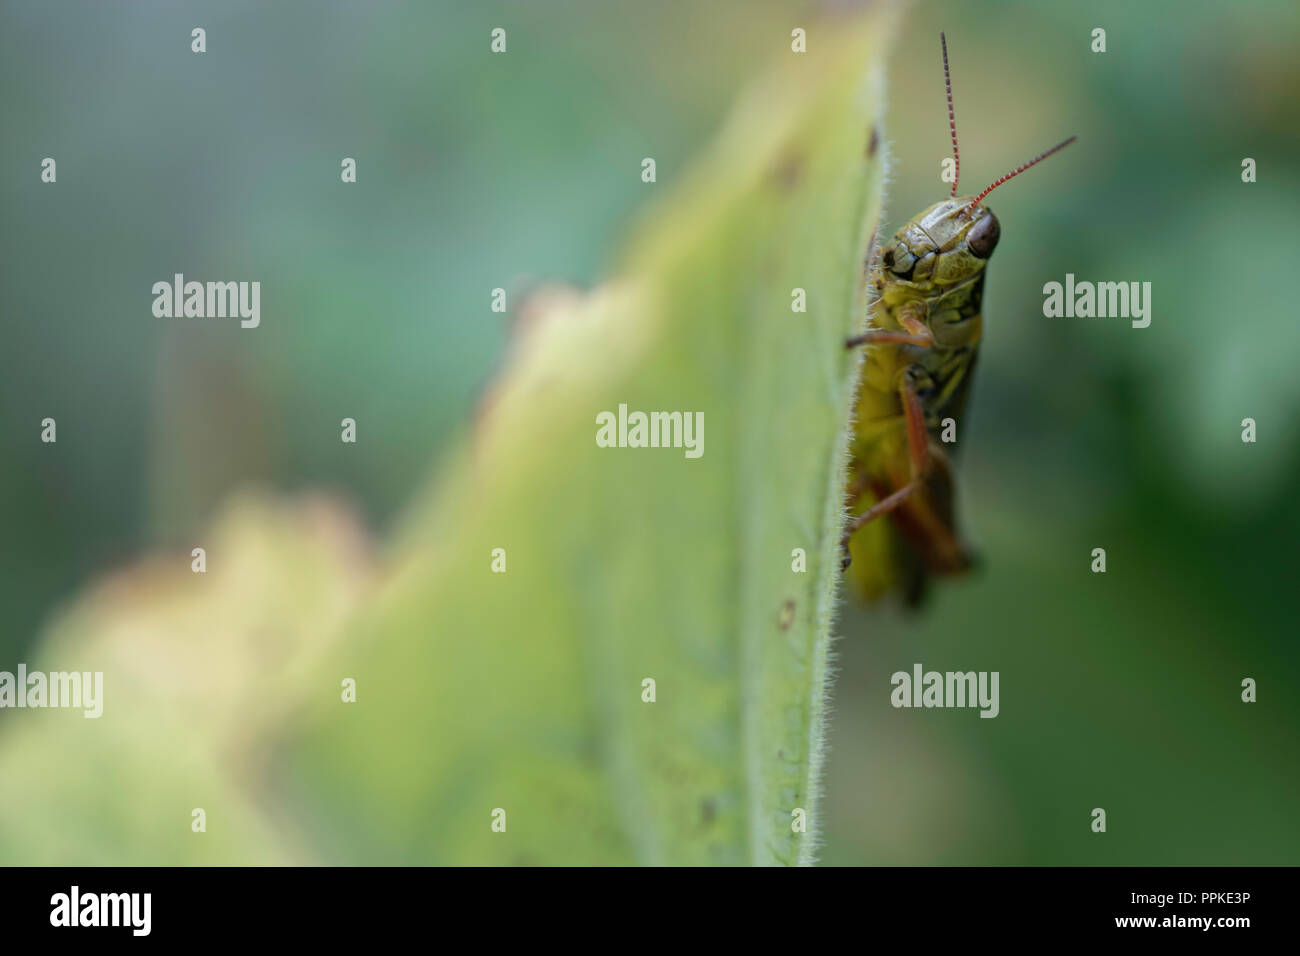 A red-legged grasshopper clings to a leaf. Stock Photo